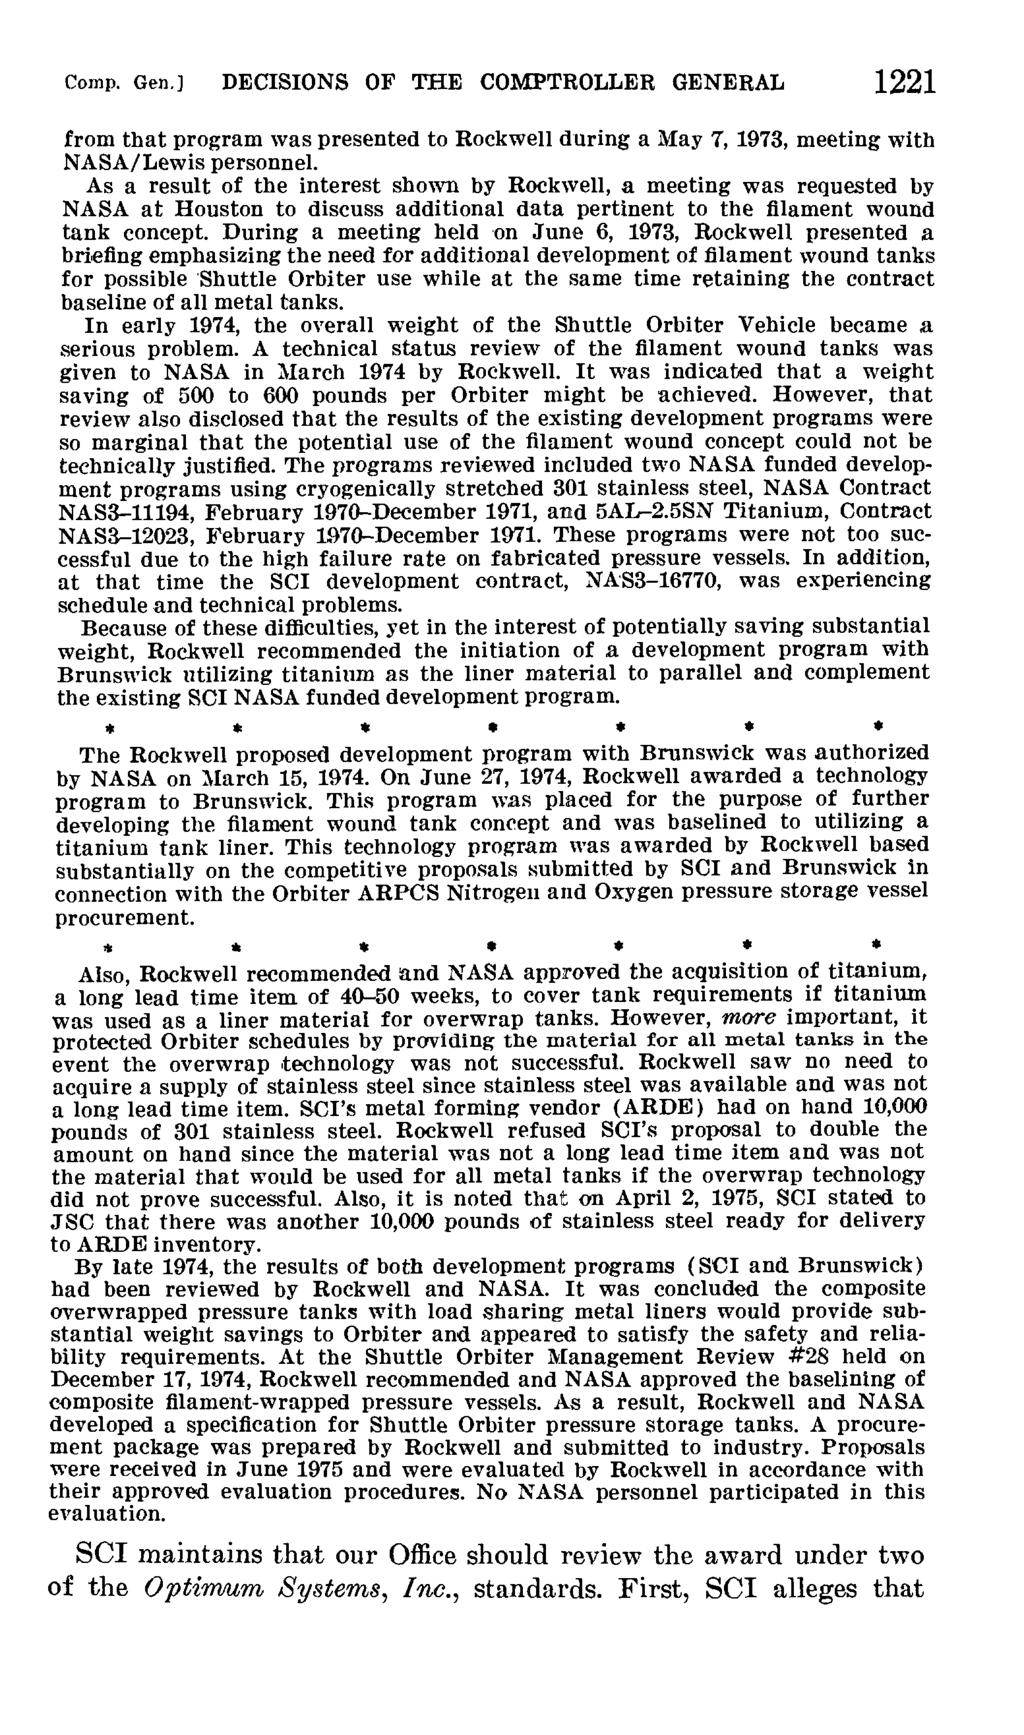 Comp. Gen.J DECISIONS OF THE COMPTROLLER GENERAL 1221 from that program was presented to Rockwell during a May 7, 1973, meeting with NASA/Lewis personnel.